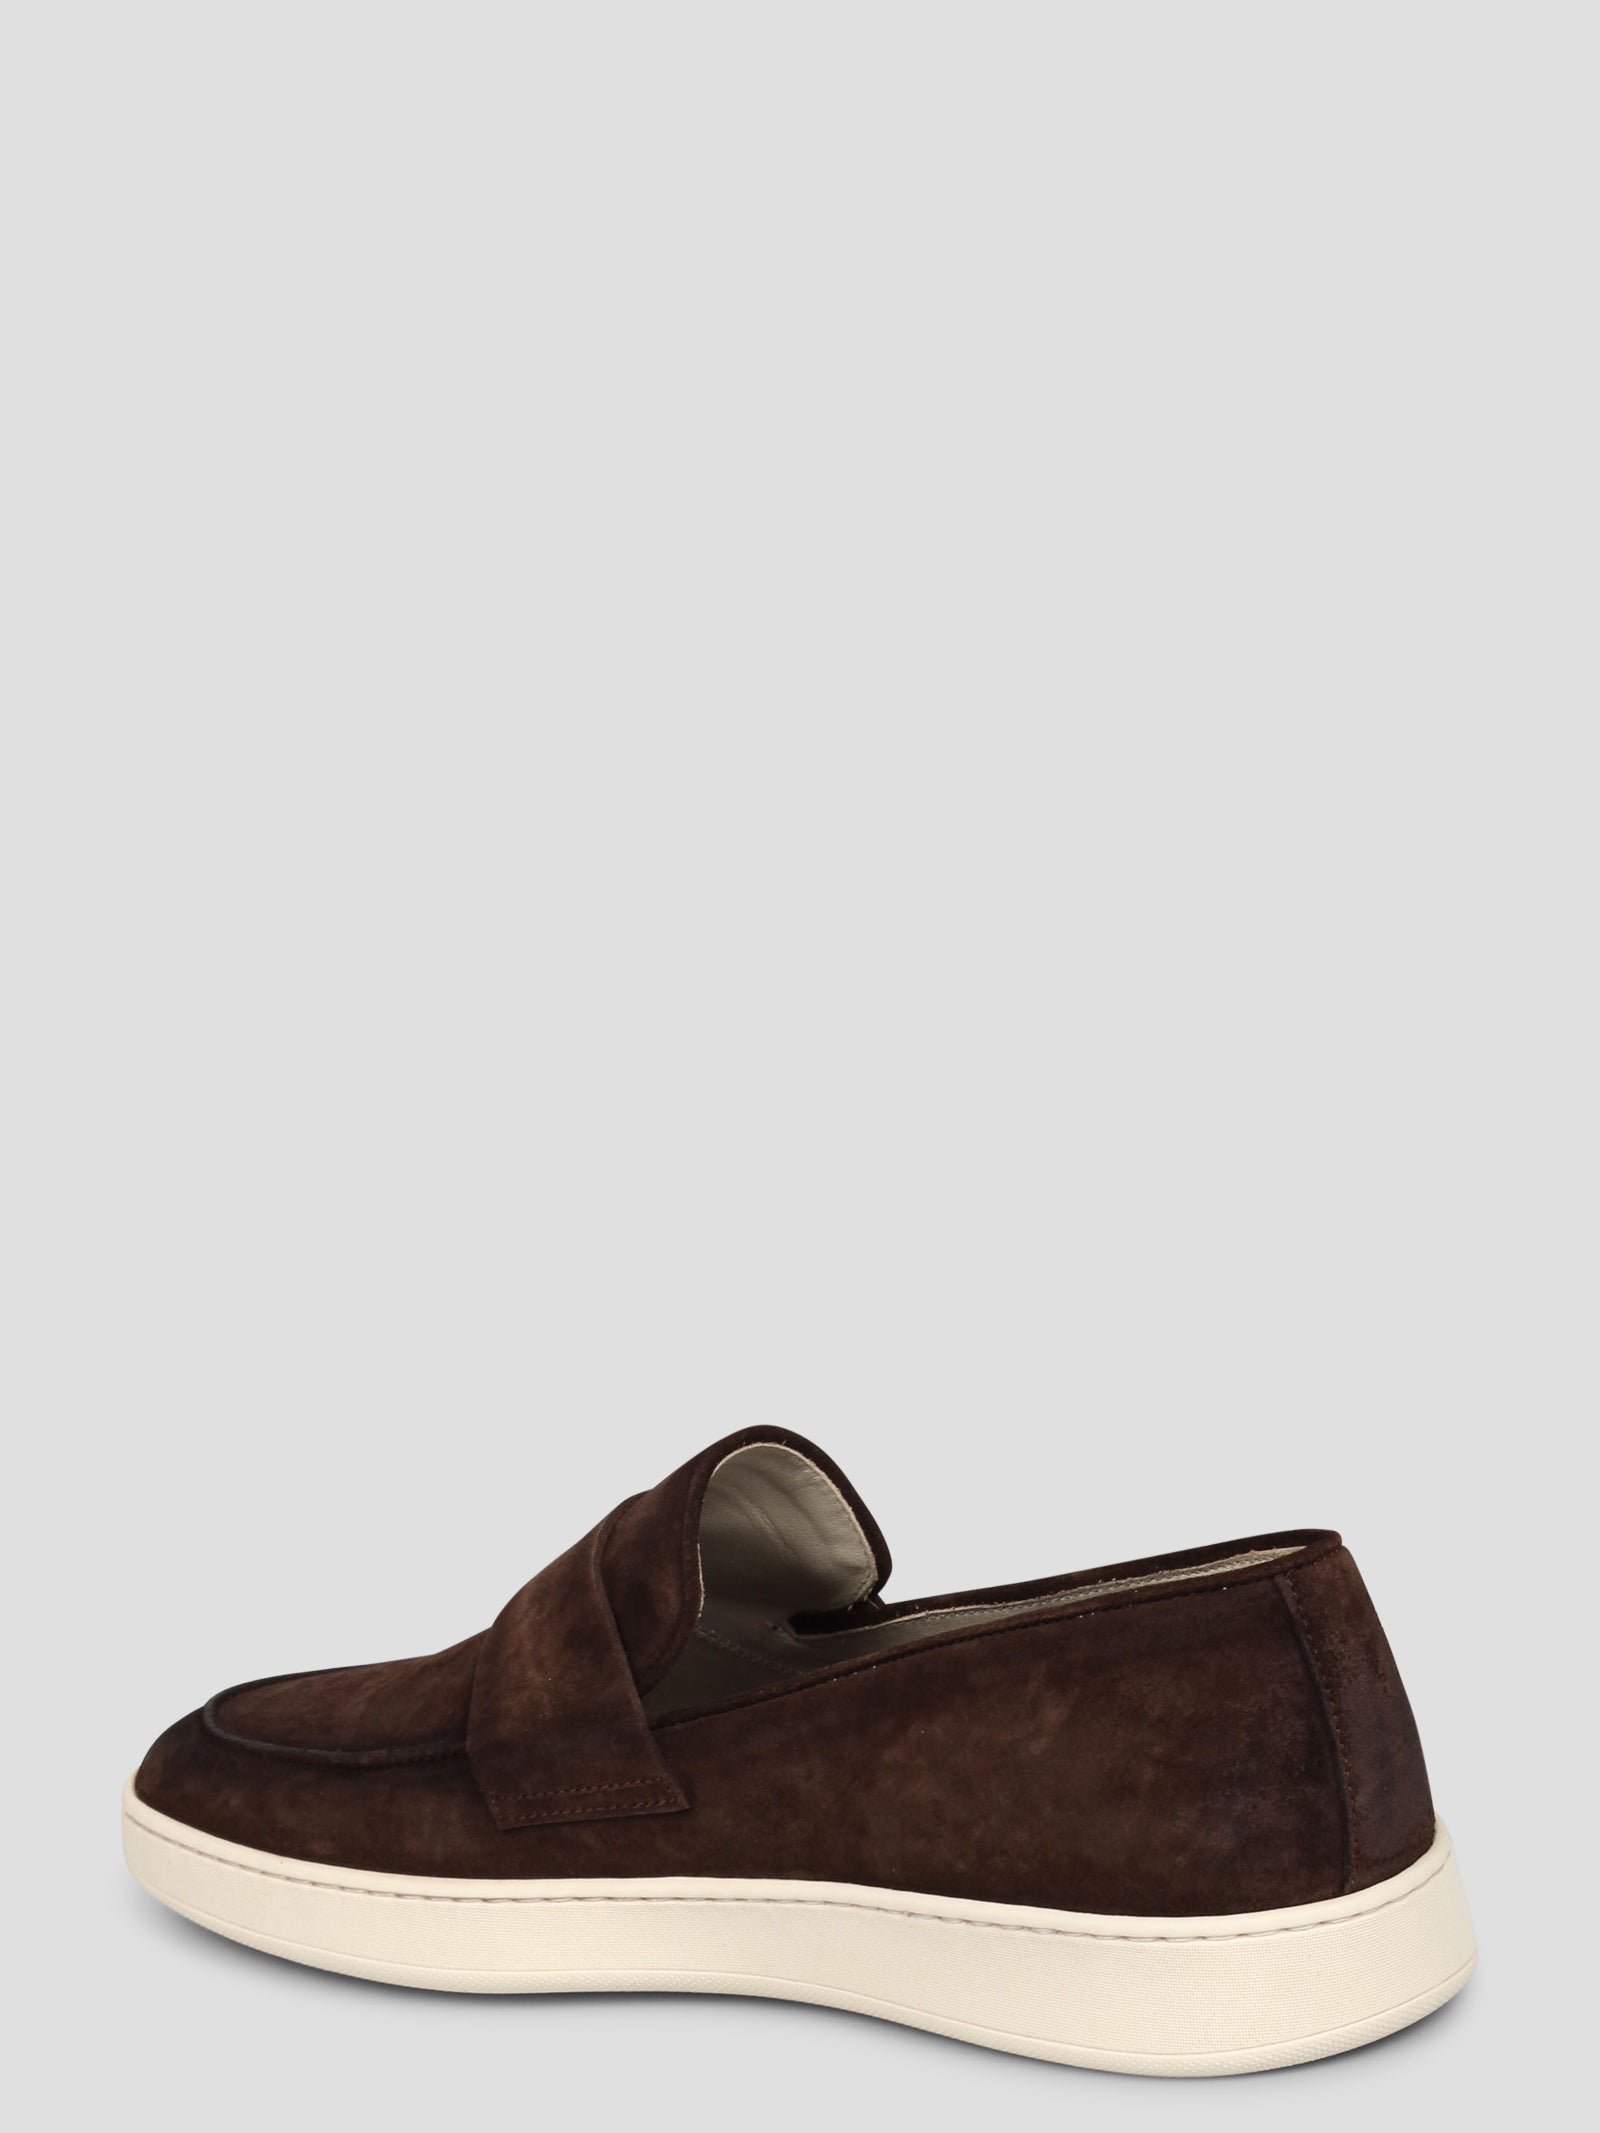 Shop Corvari Boat Penny Loafers